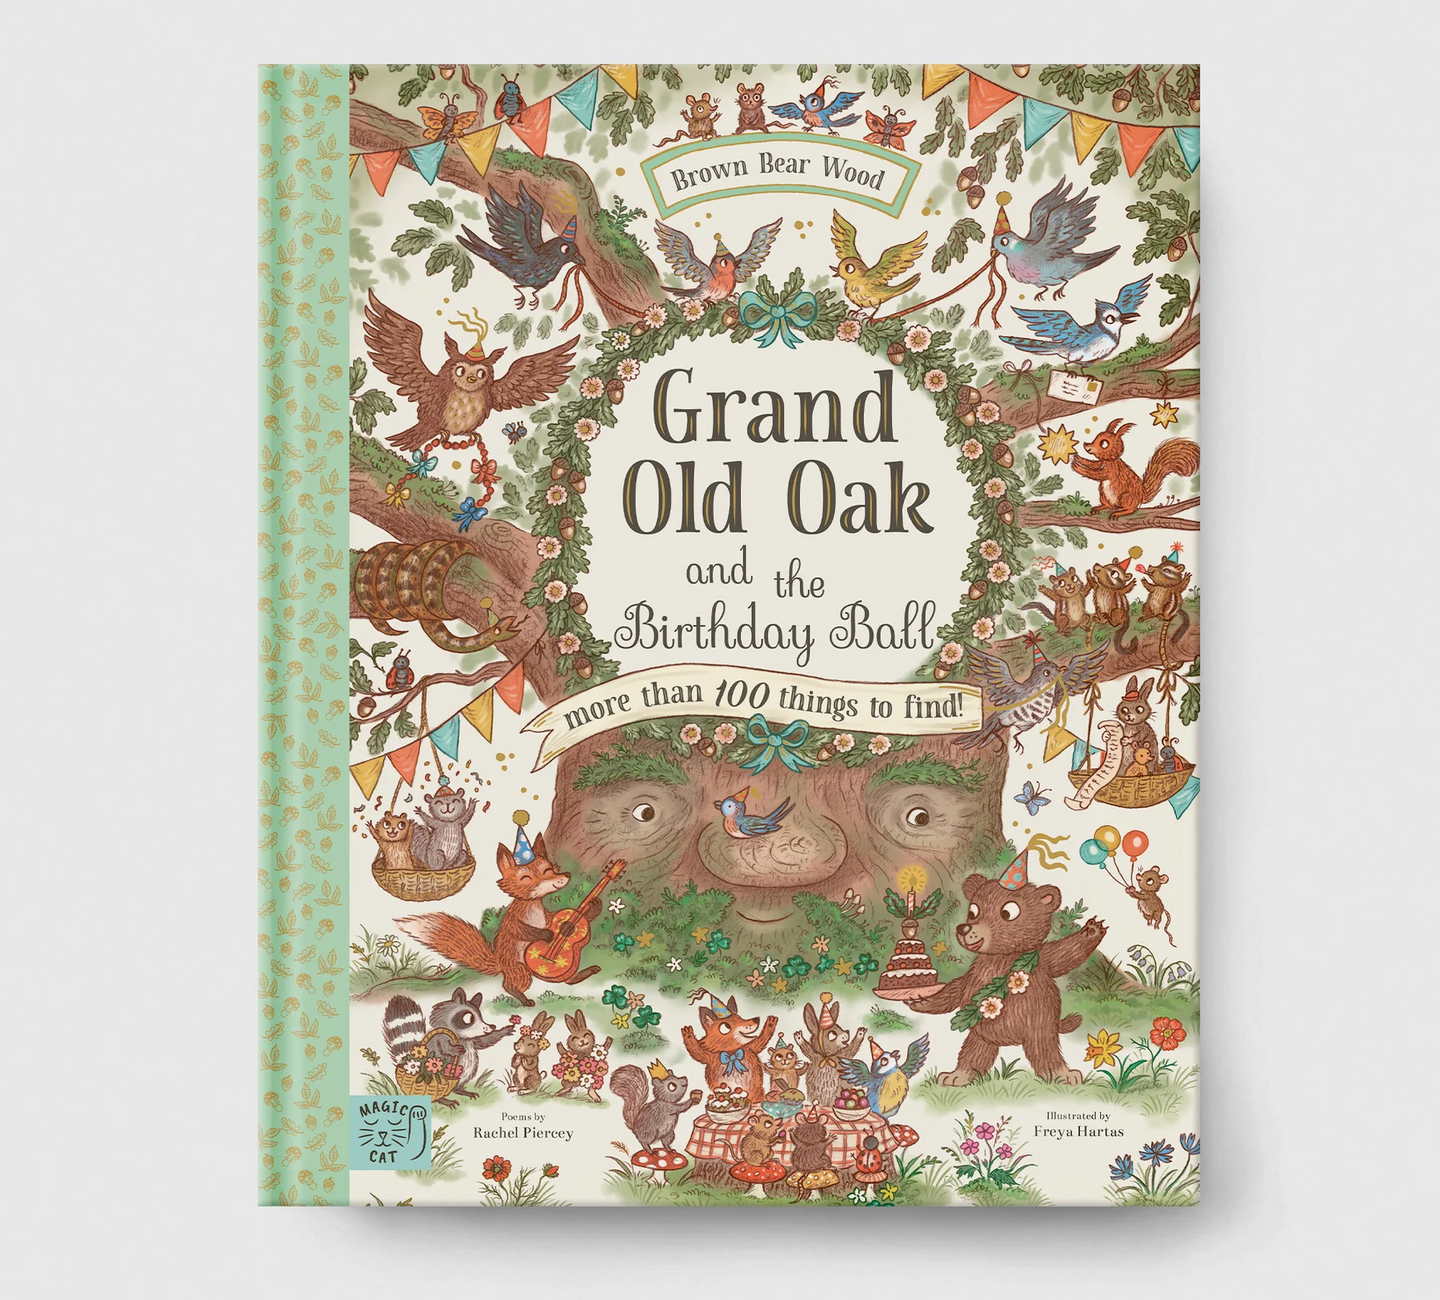 Grand Old Oak and the Birthday Ball – More than 100 Things to Find